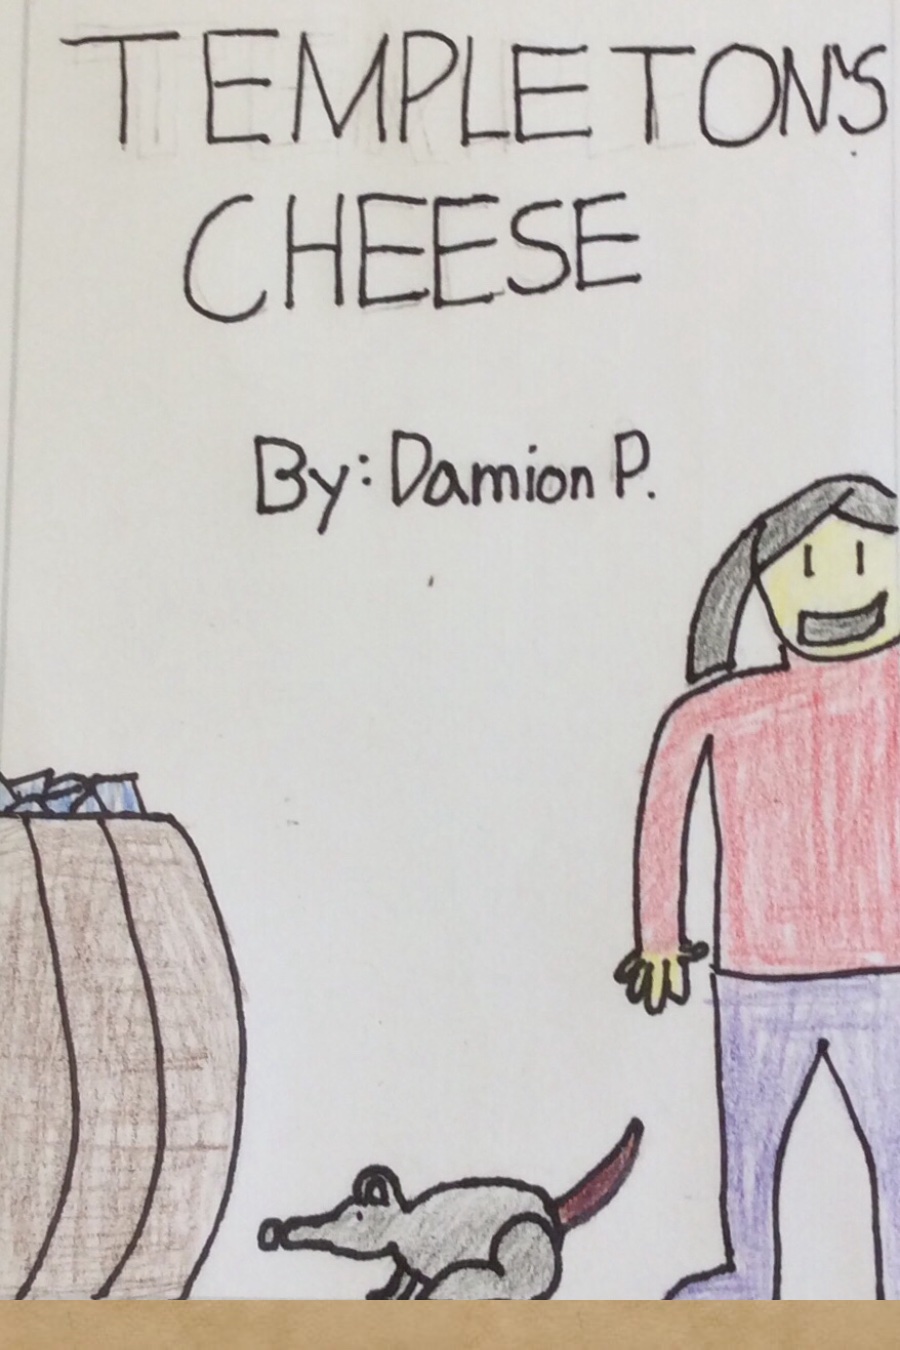 Templeton’s Cheese By Damion P